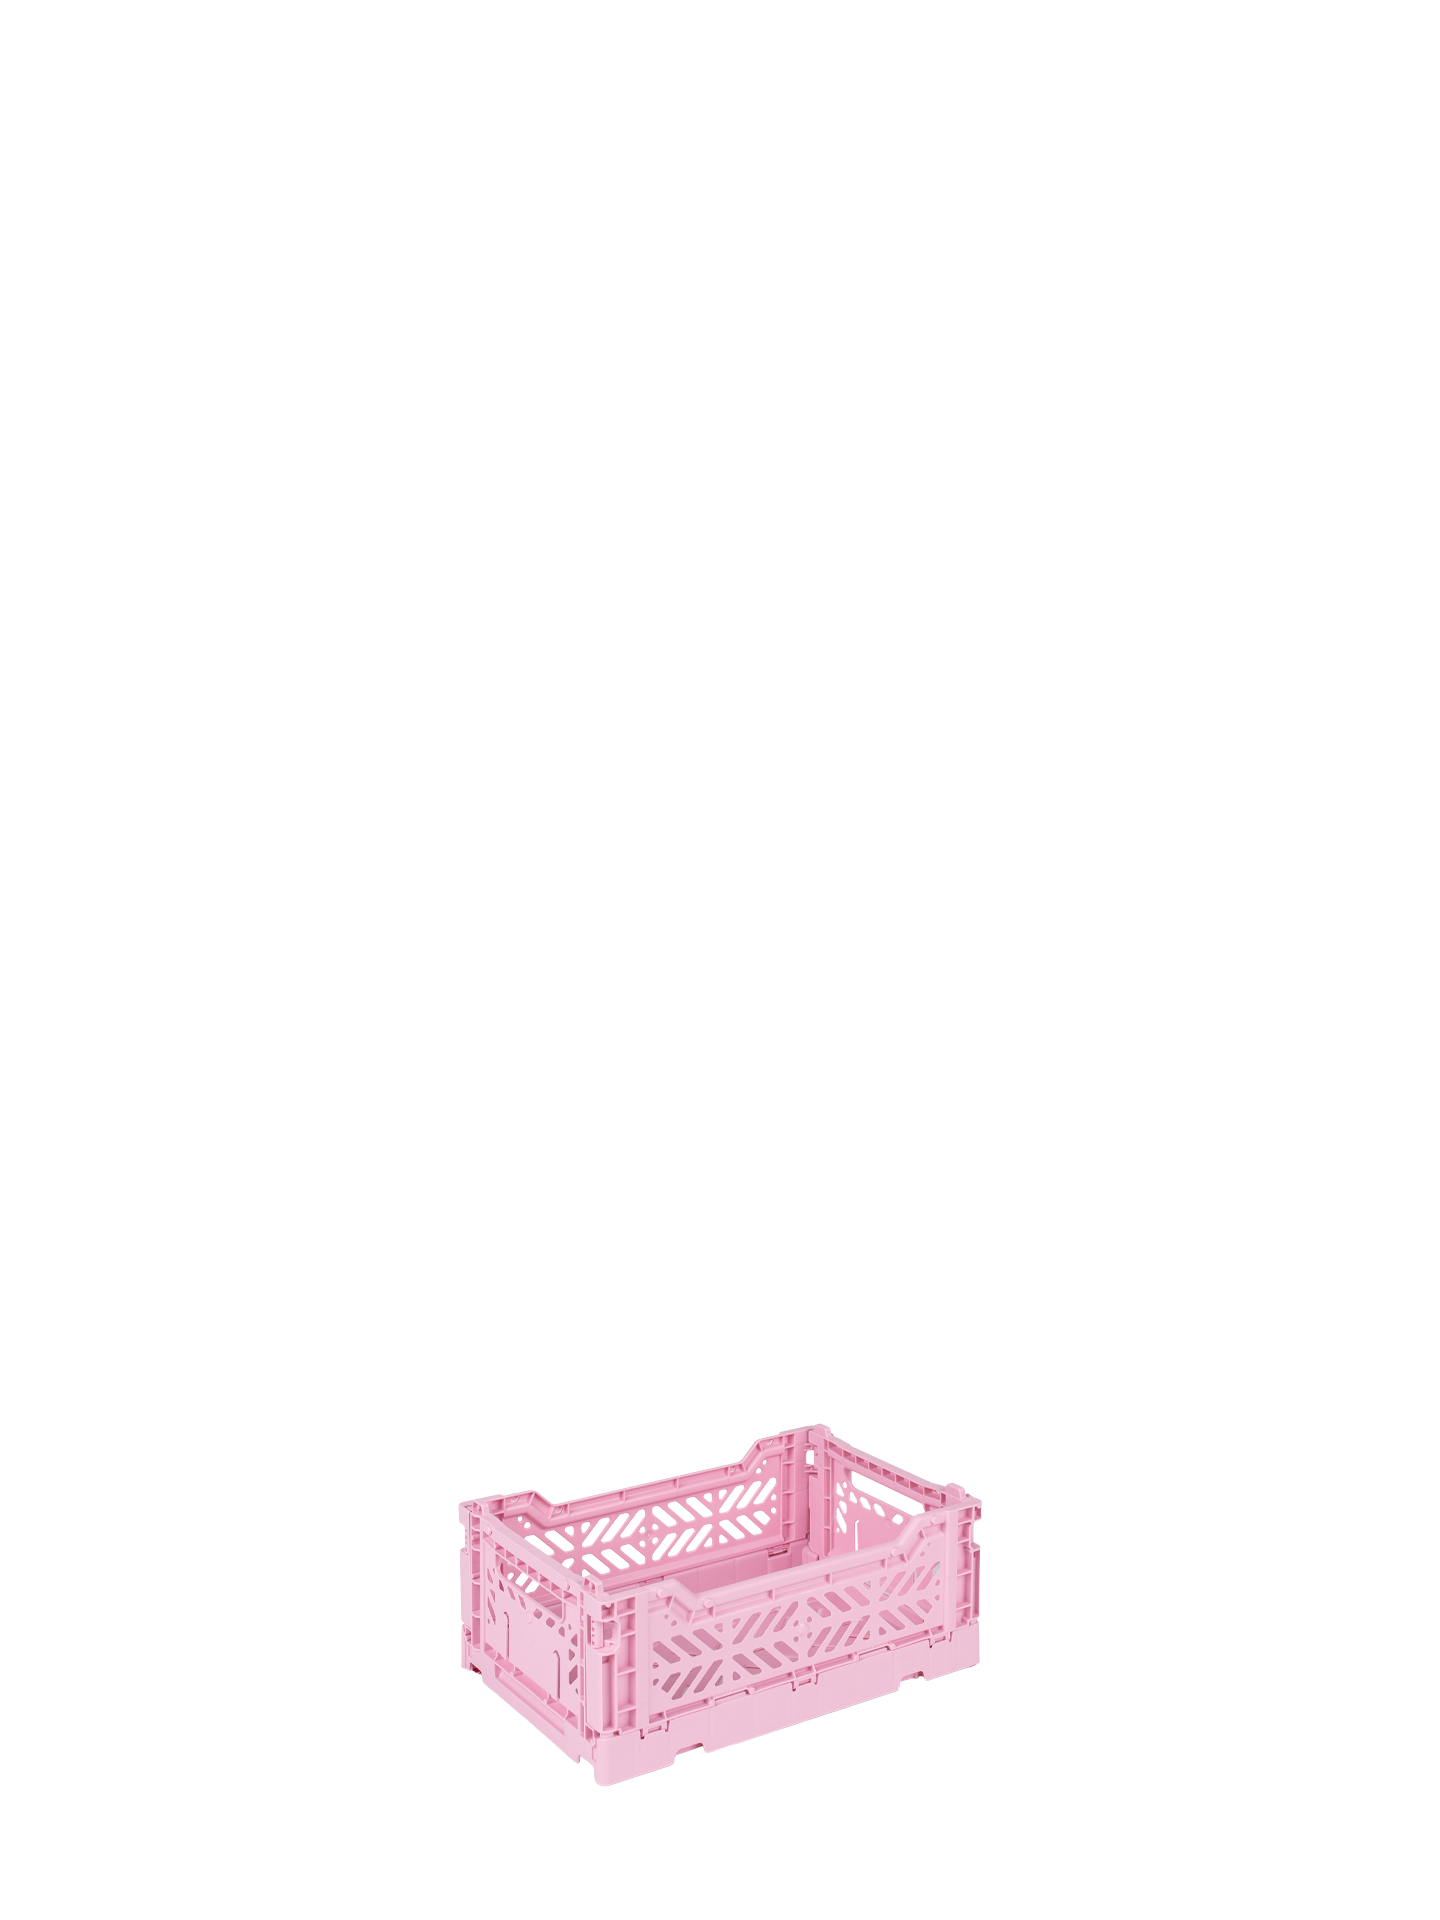 Mini Aykasa crate in cherry blossom pastel pink stacks and folds